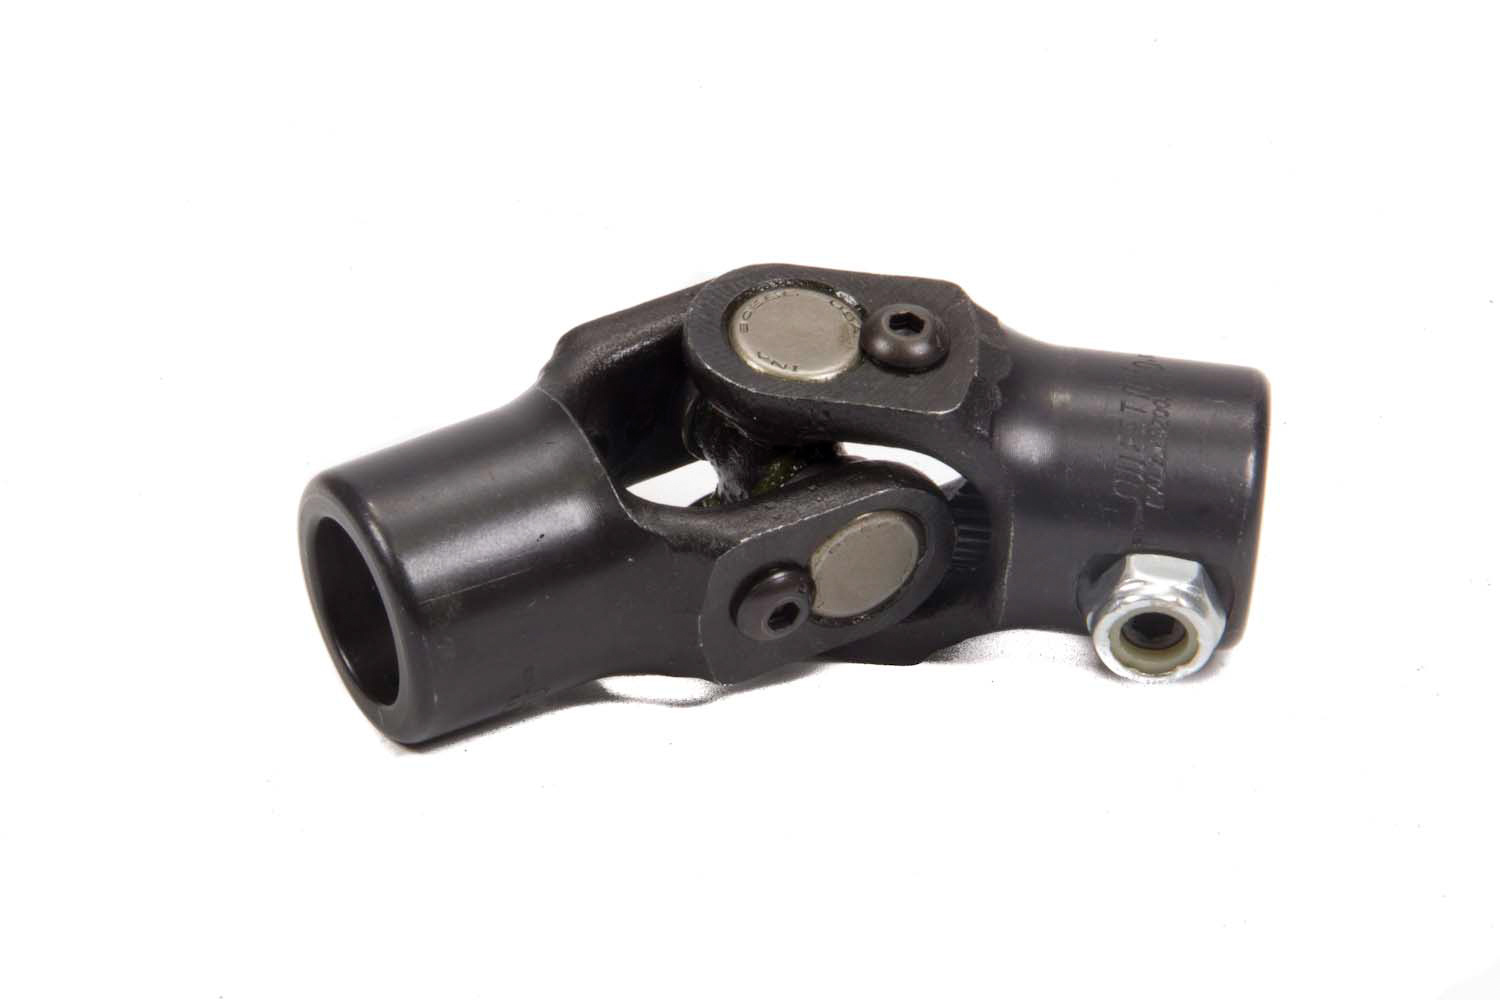 Steering Universal Joint - Single Joint - 3/4 in Smooth Bore to 3D Jeep Flats - Steel - Black Paint - Each